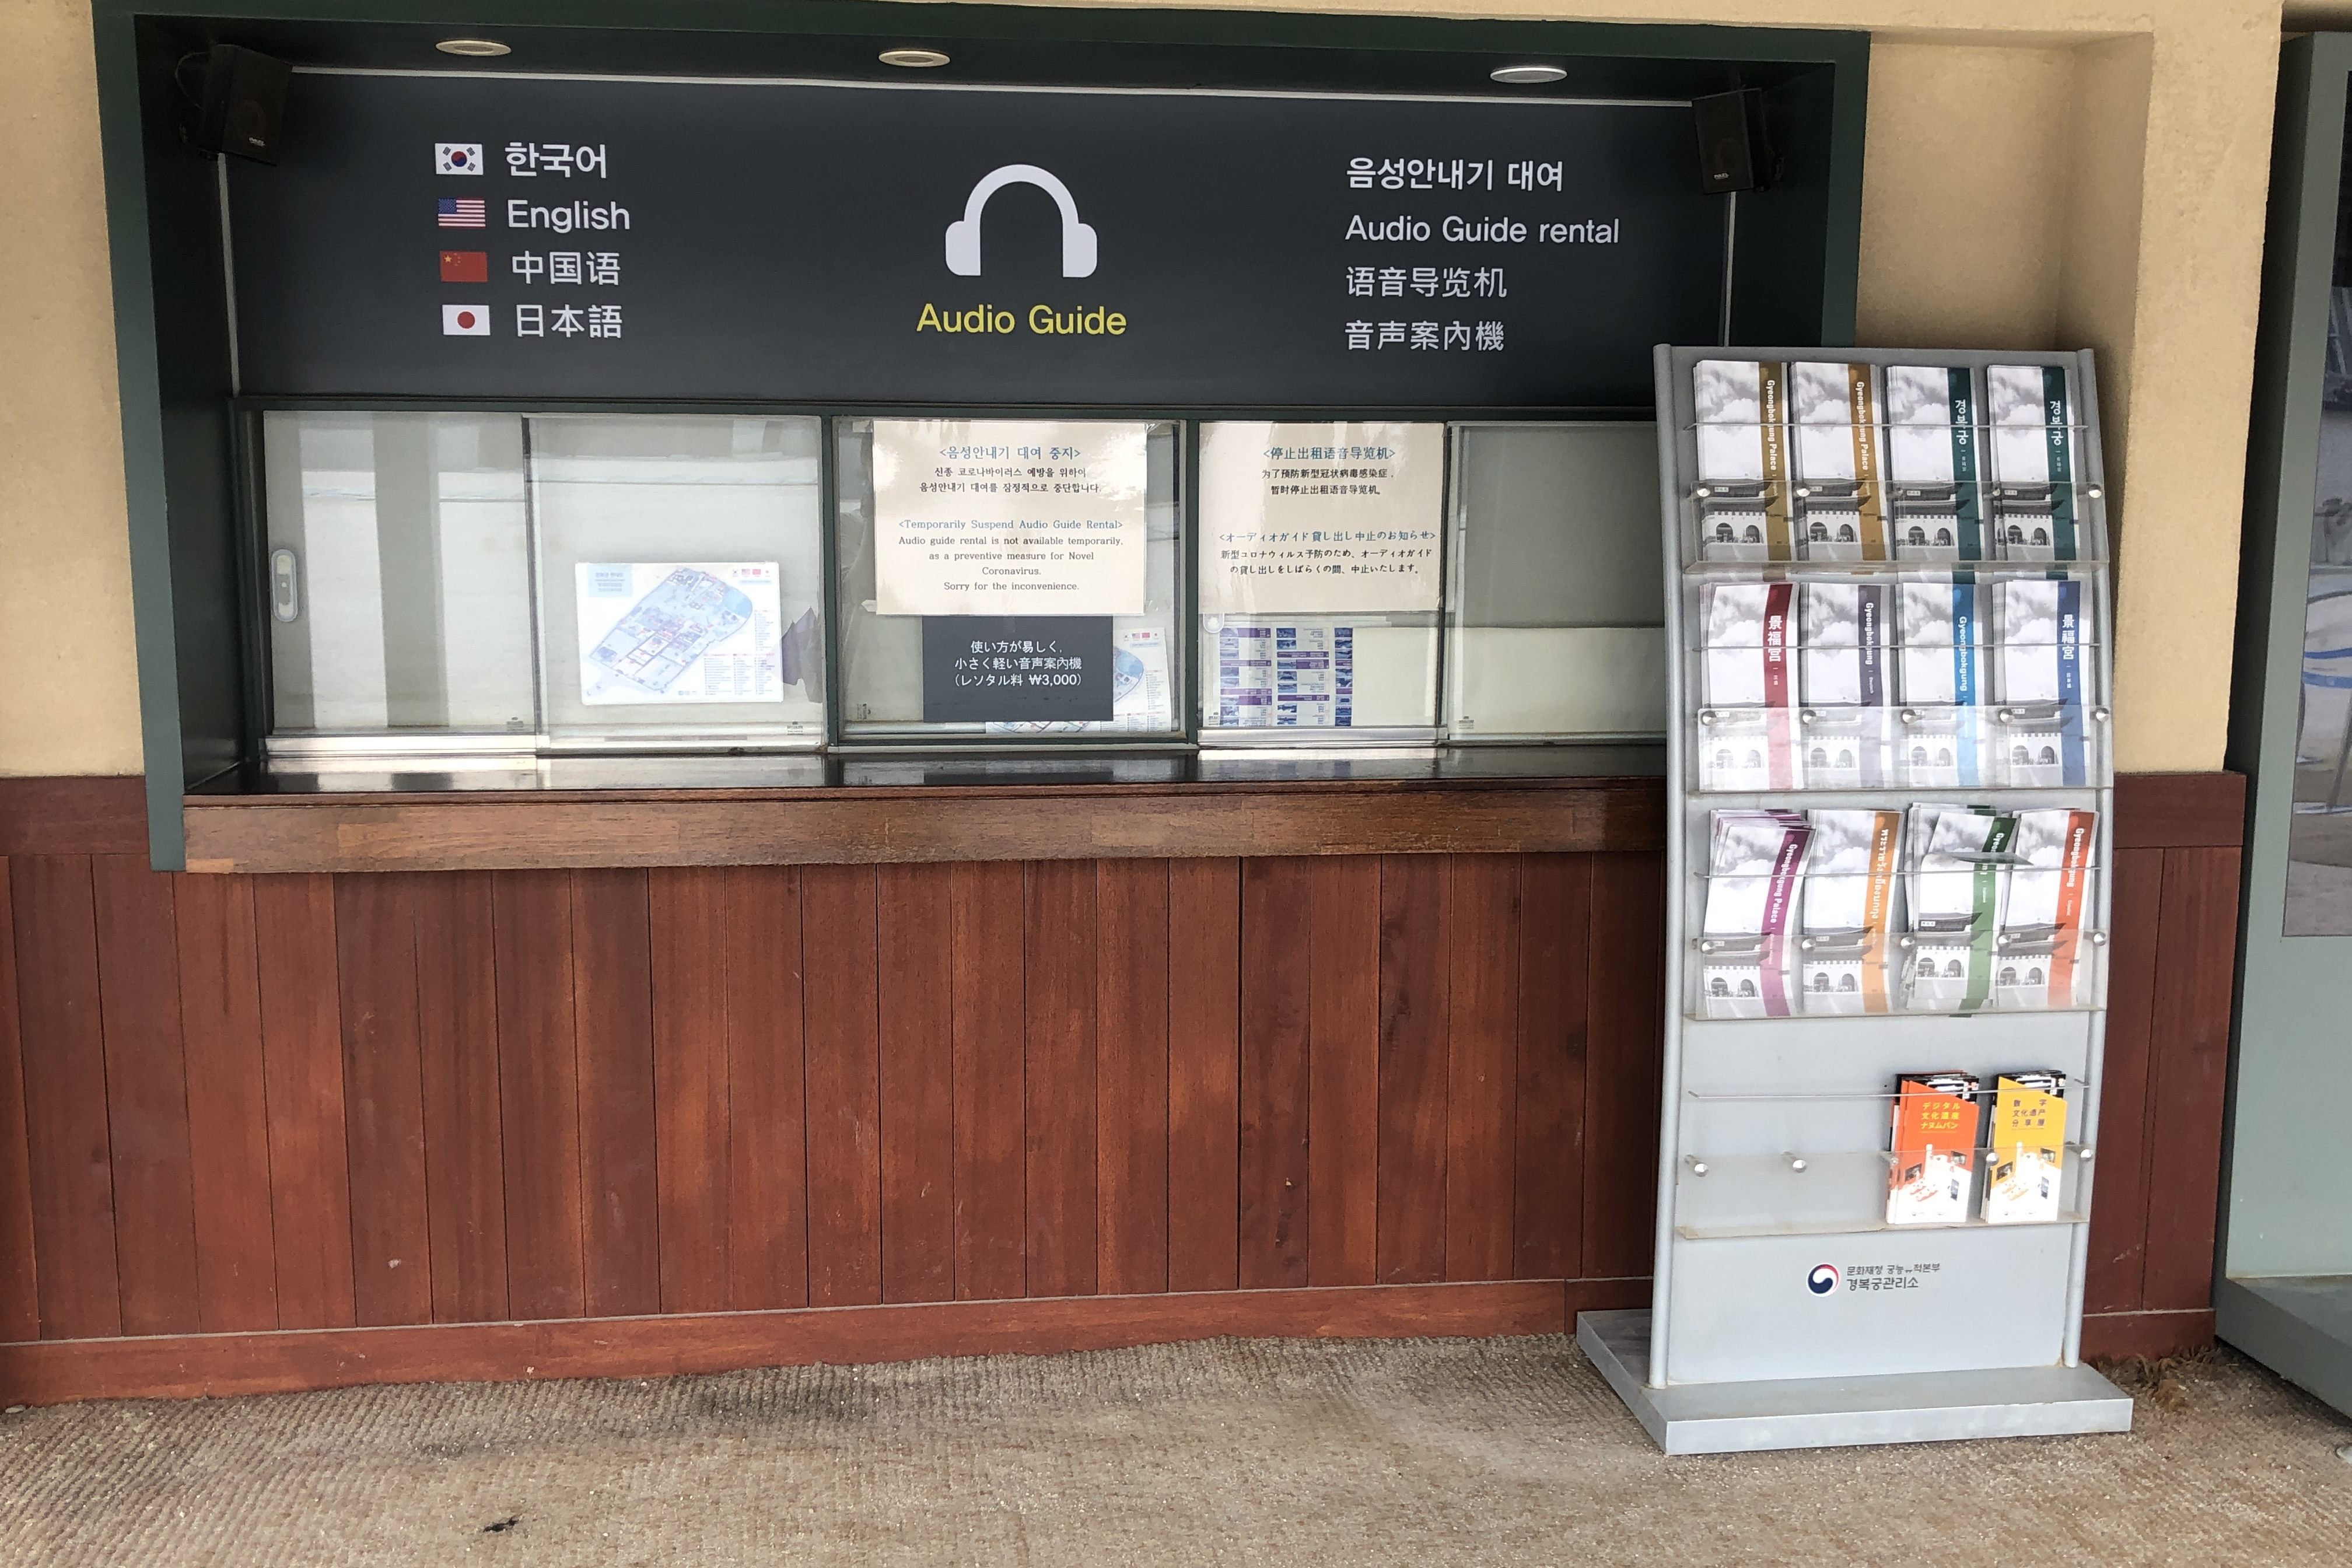 Guide map and information desk0 : Information desk of Gyeongbokgung Palace where one can get the guide map with Korean braille descriptions and sign language
